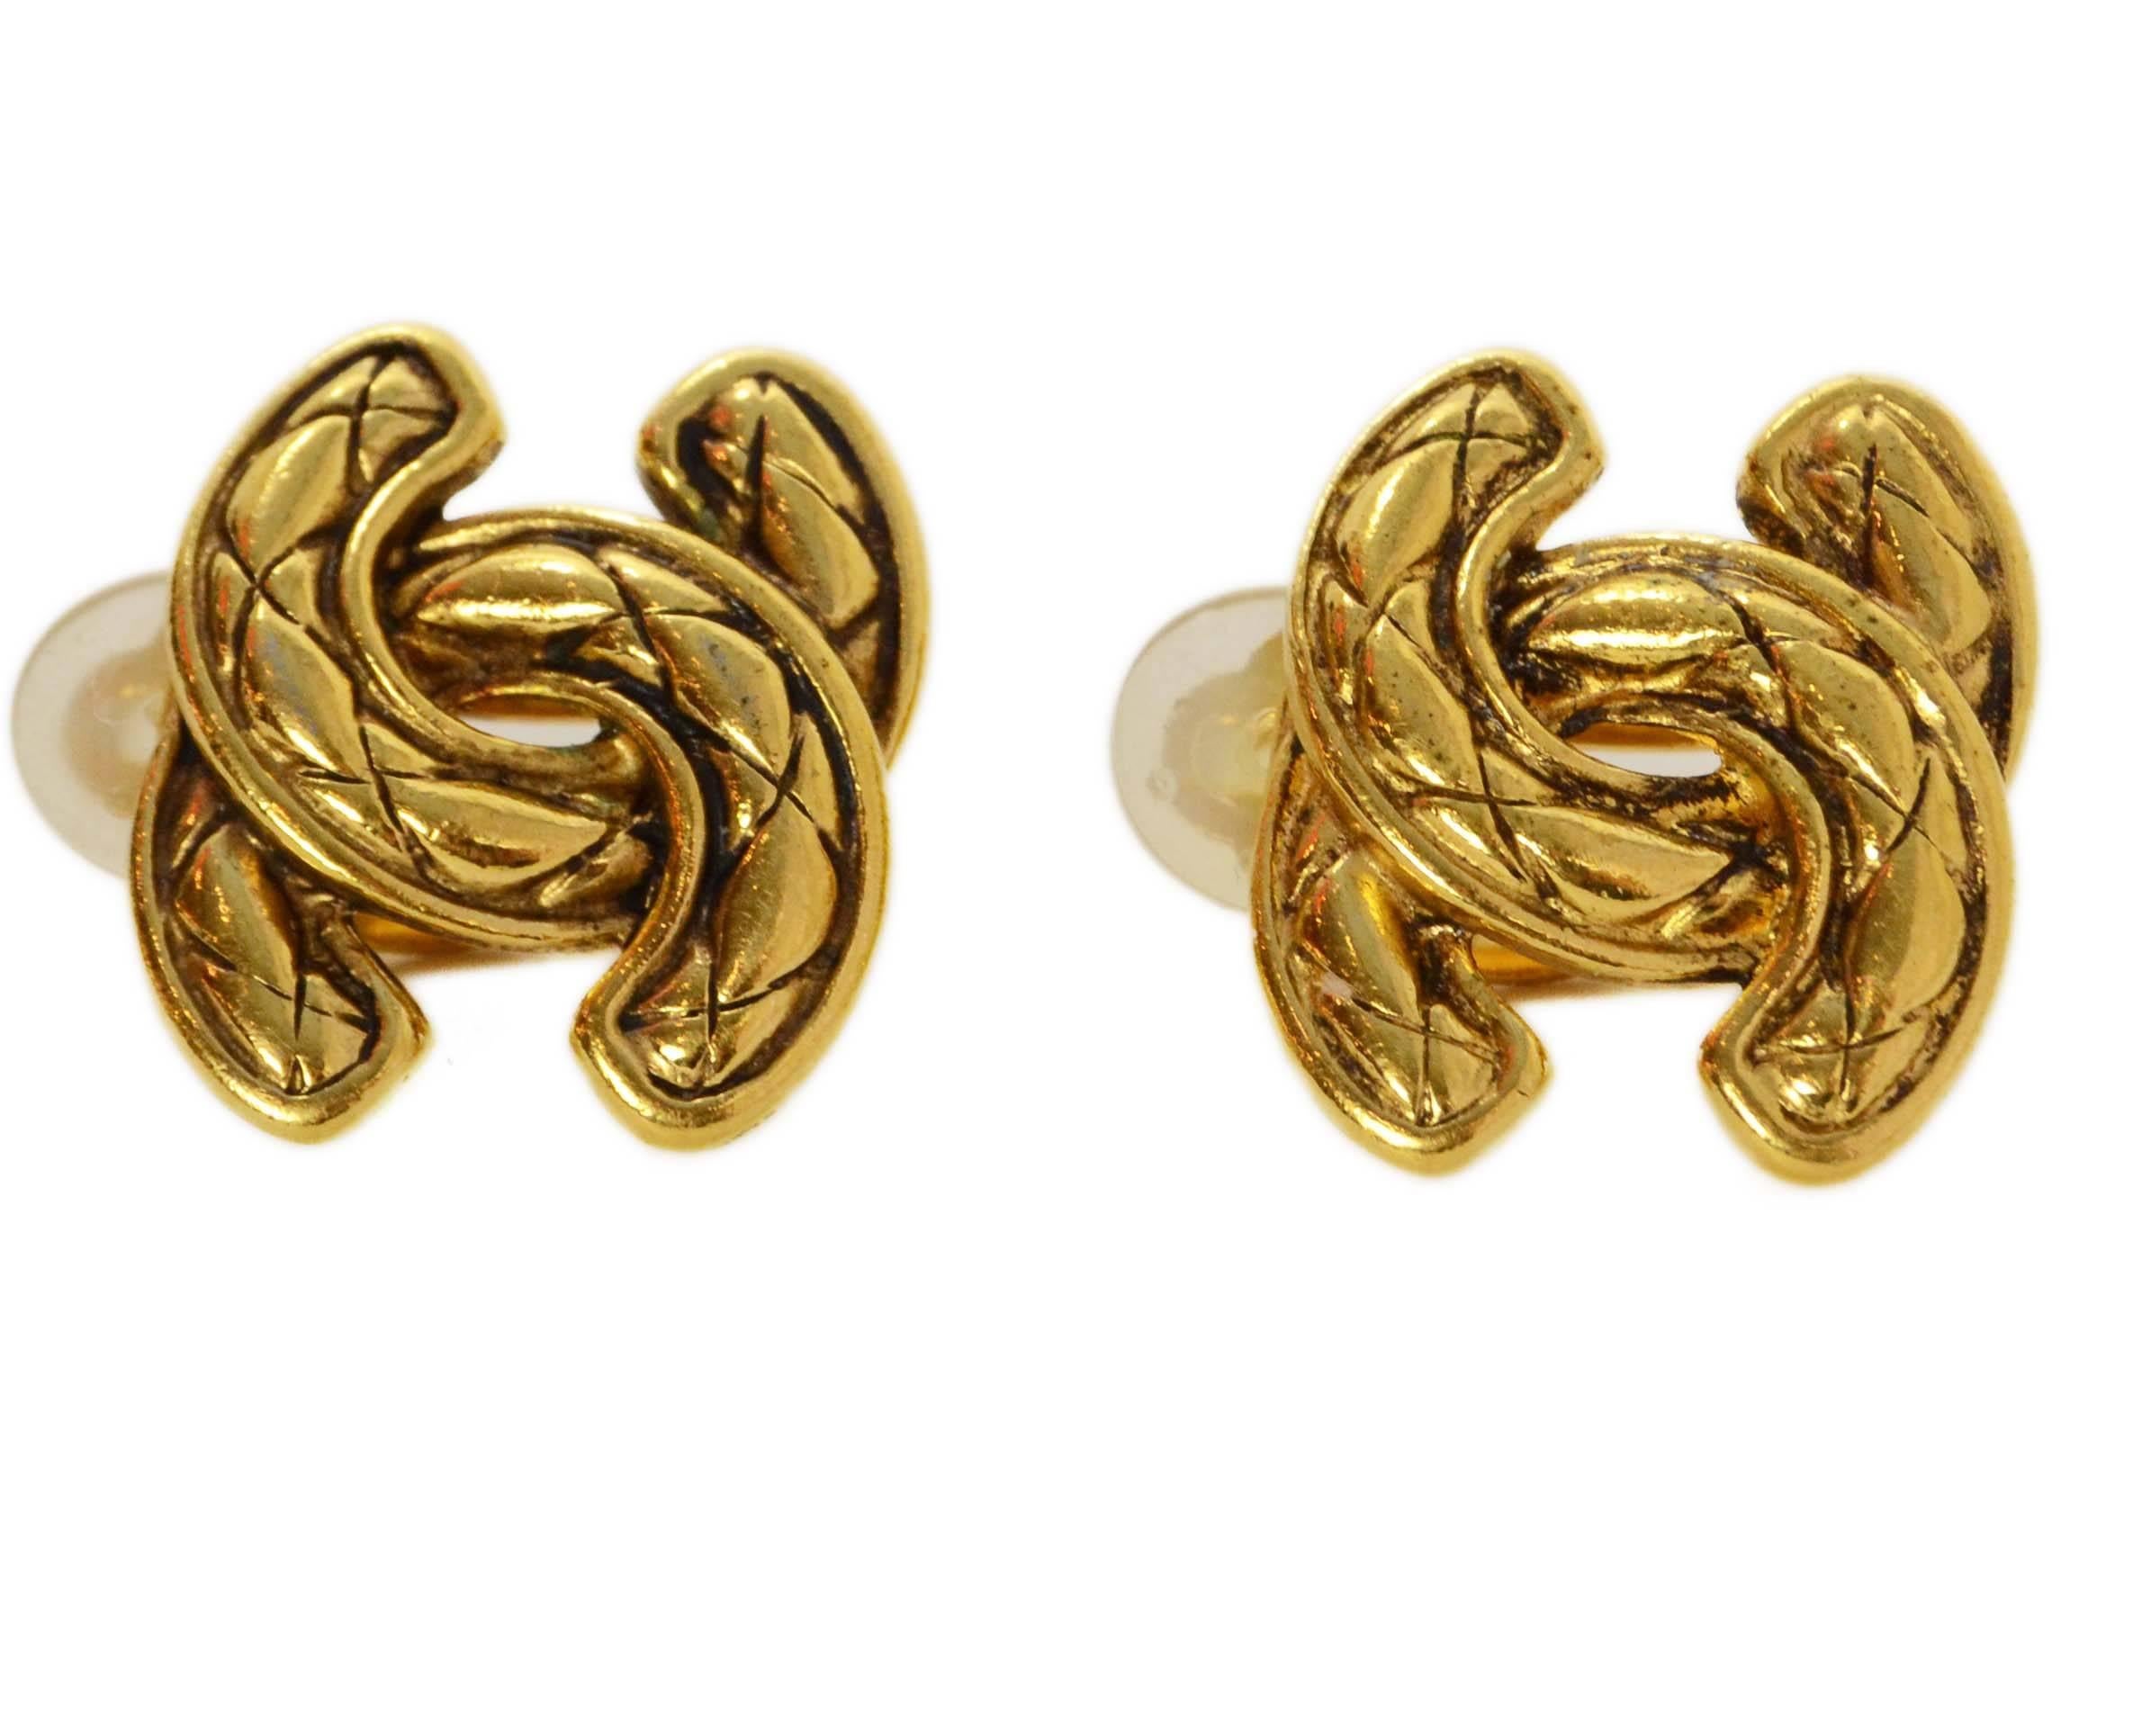 Chanel Vintage '90s Quilted Gold CC Clip On Earrings 
Made In: France
Year of Production: 1990s
Color: Goldtone
Materials: Metal
Closure: Clip on
Stamp: 2436 Chanel
Overall Condition: Excellent vintage, pre-owned condition
Measurements: